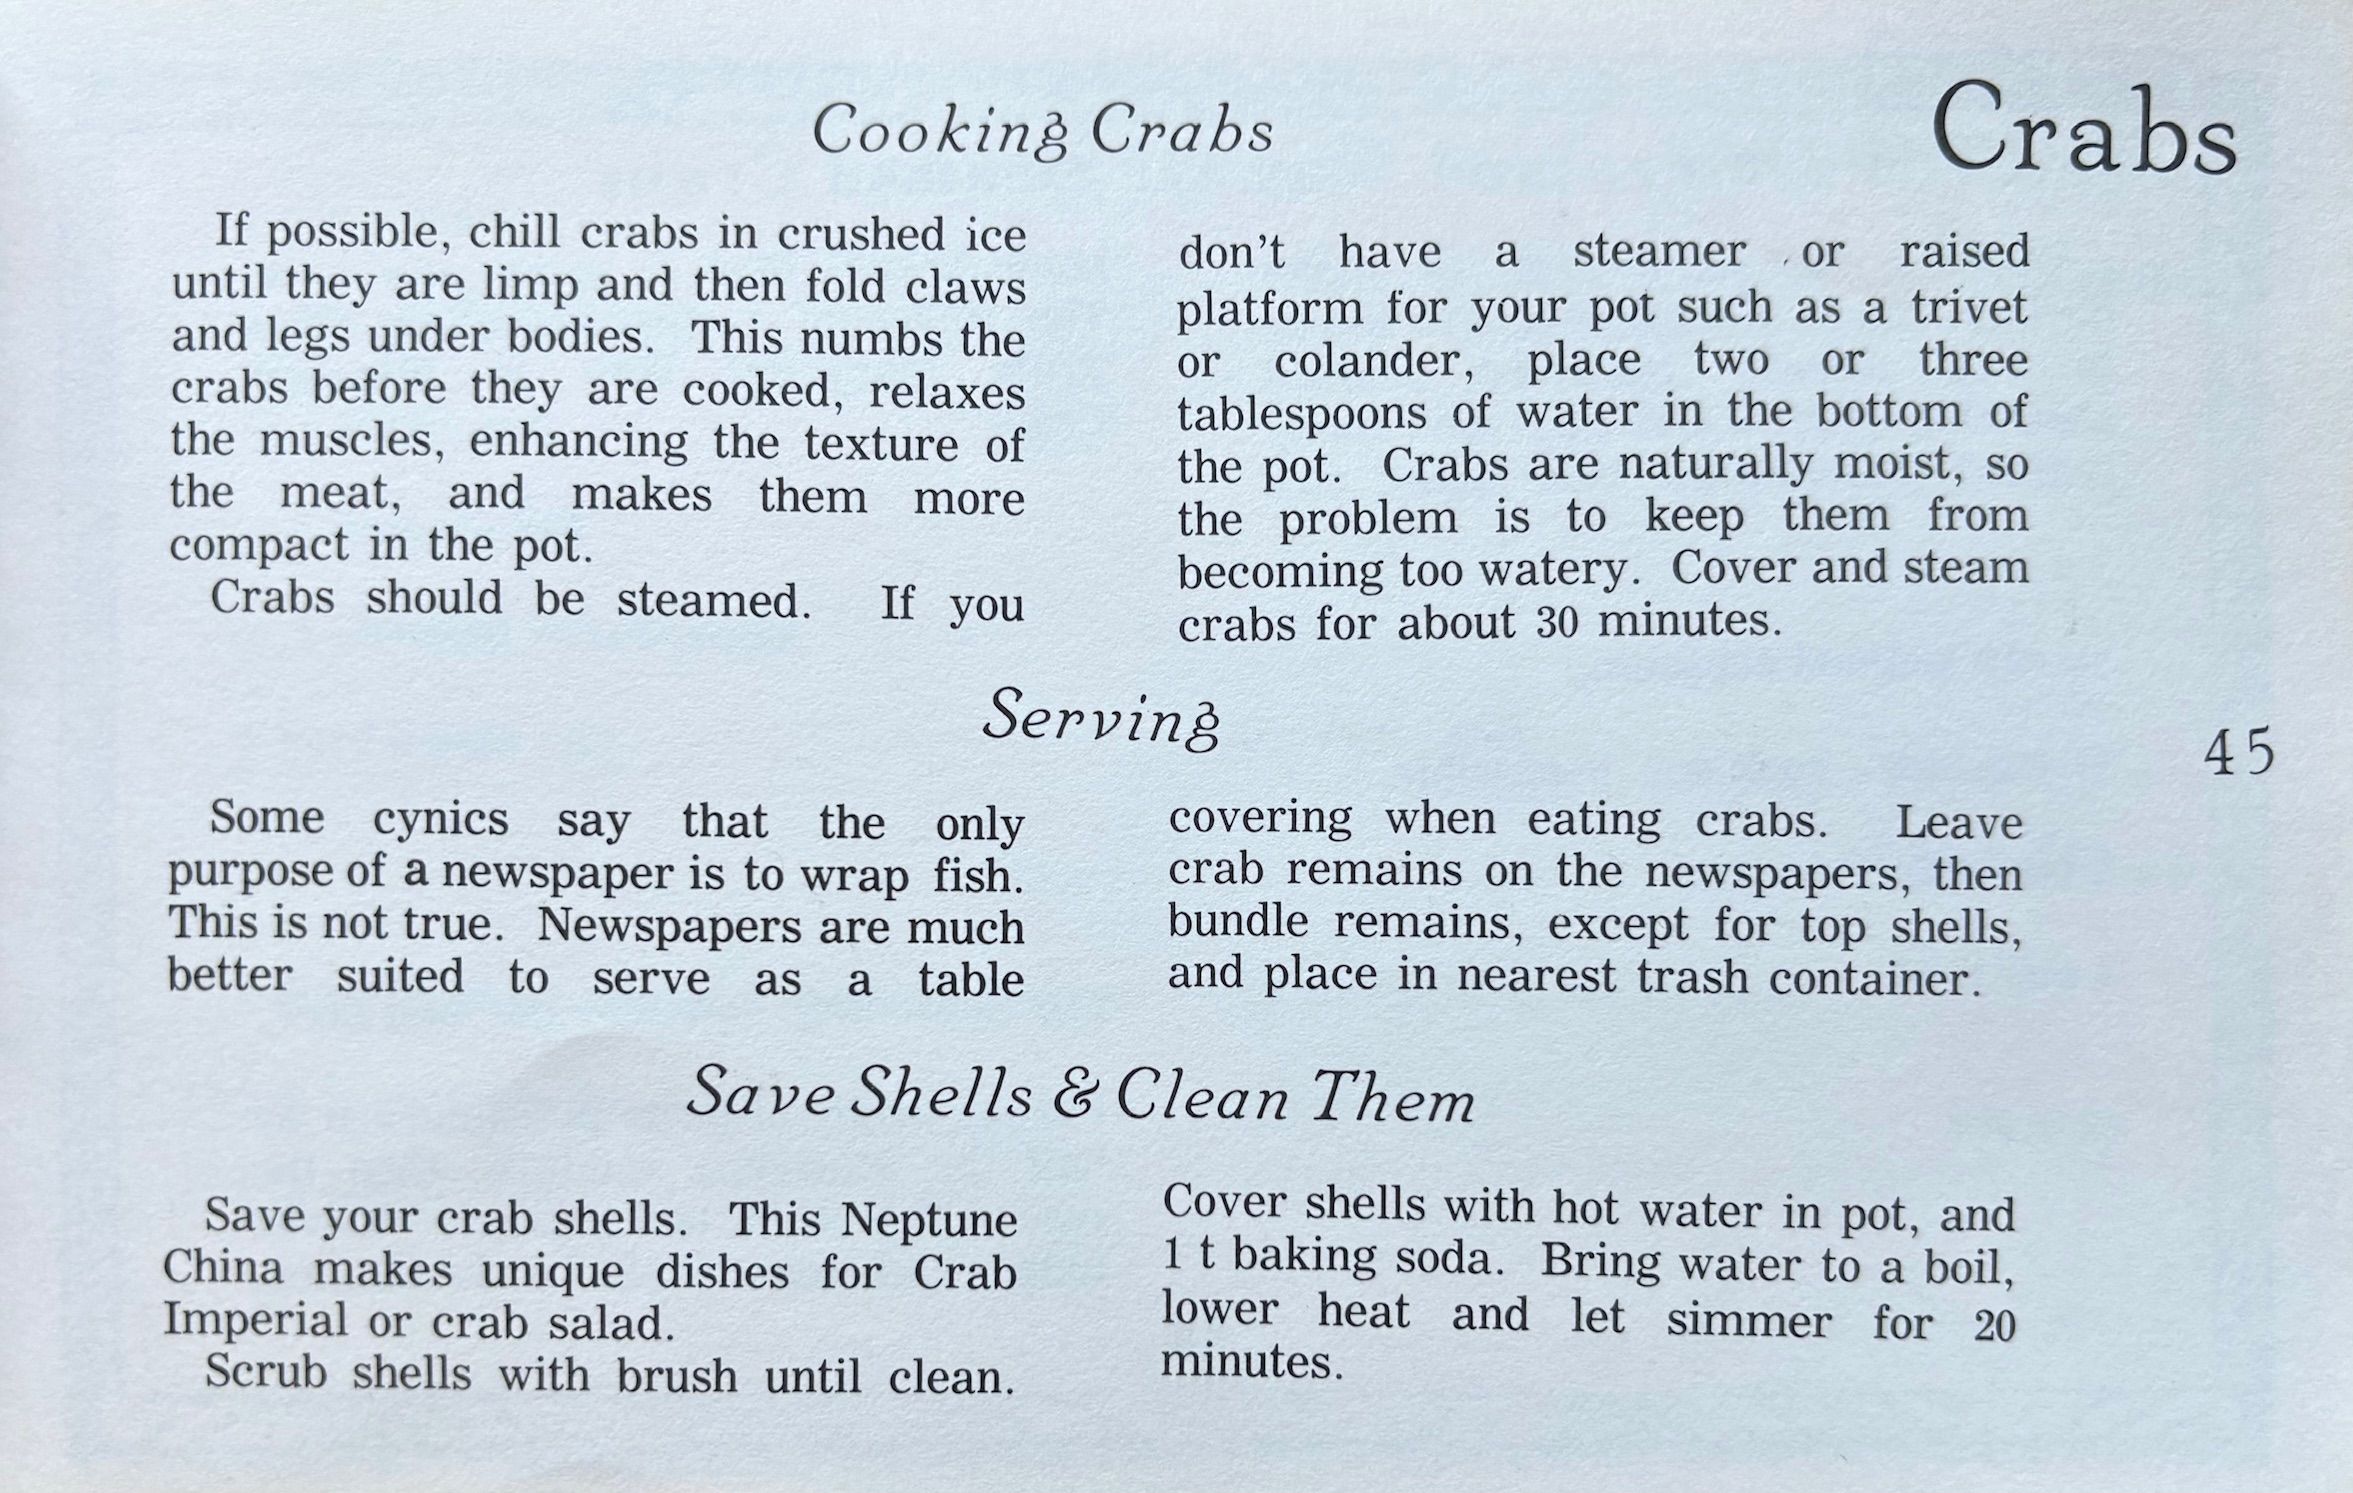 (*NEW ARRIVAL*) Robinson, Robert H. & Daniel G. Coston Jr. The Craft of Dismantling a Crab; How To Open Clams, Crabs, Lobsters, Oysters & Other Shellfish